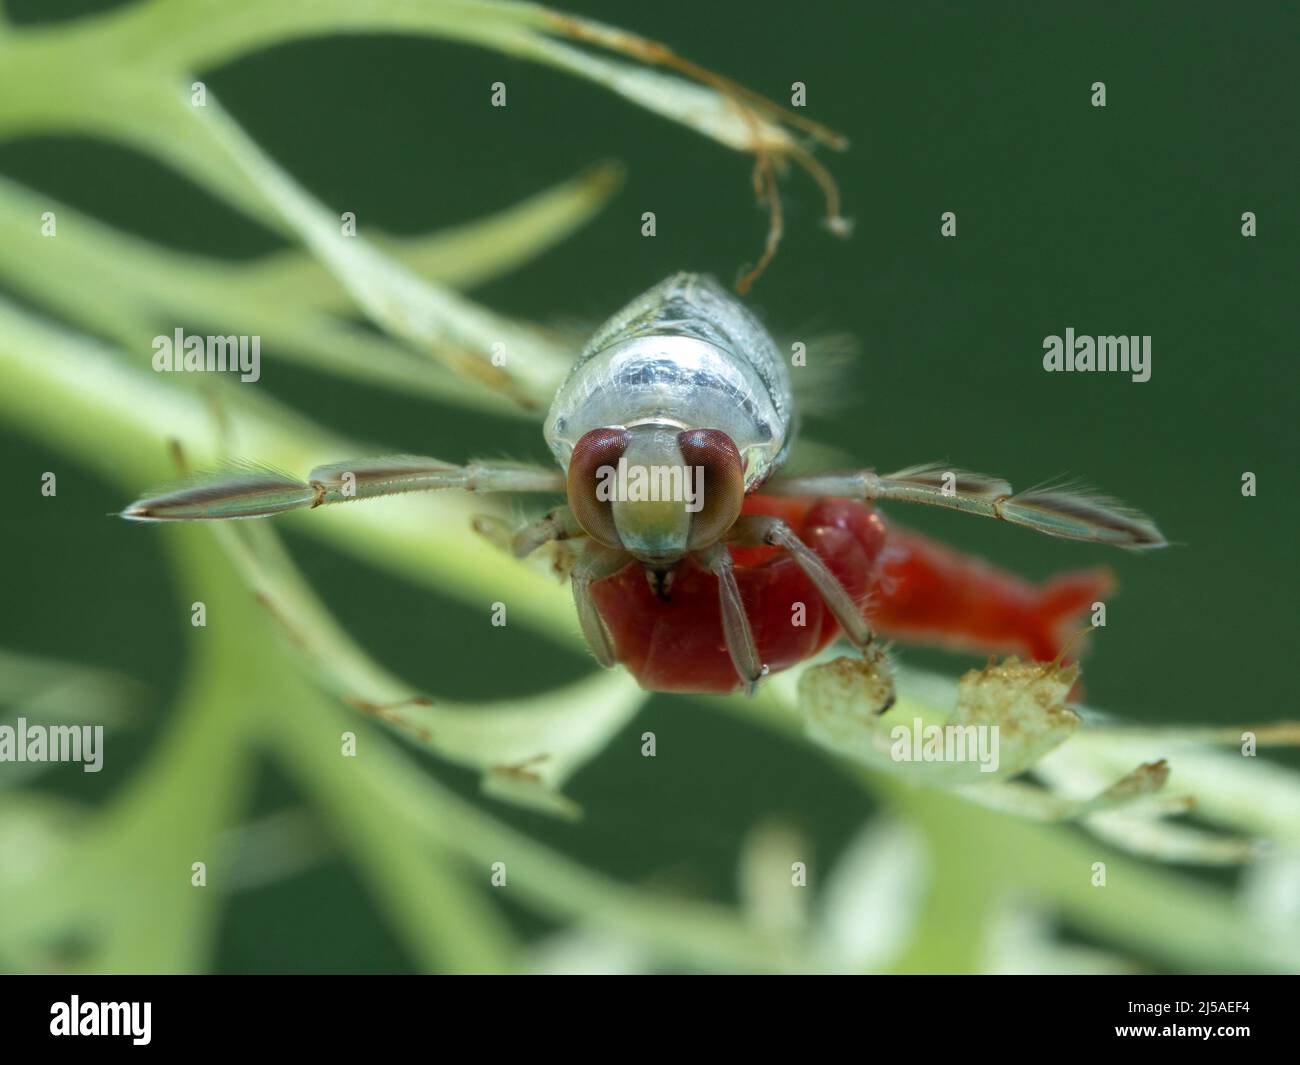 an aquatic grousewinged backswimmer (Notonecta undulata) on an underwater plant feeding on a bloodworm (chironomid larve) with its sharp proboscis Stock Photo